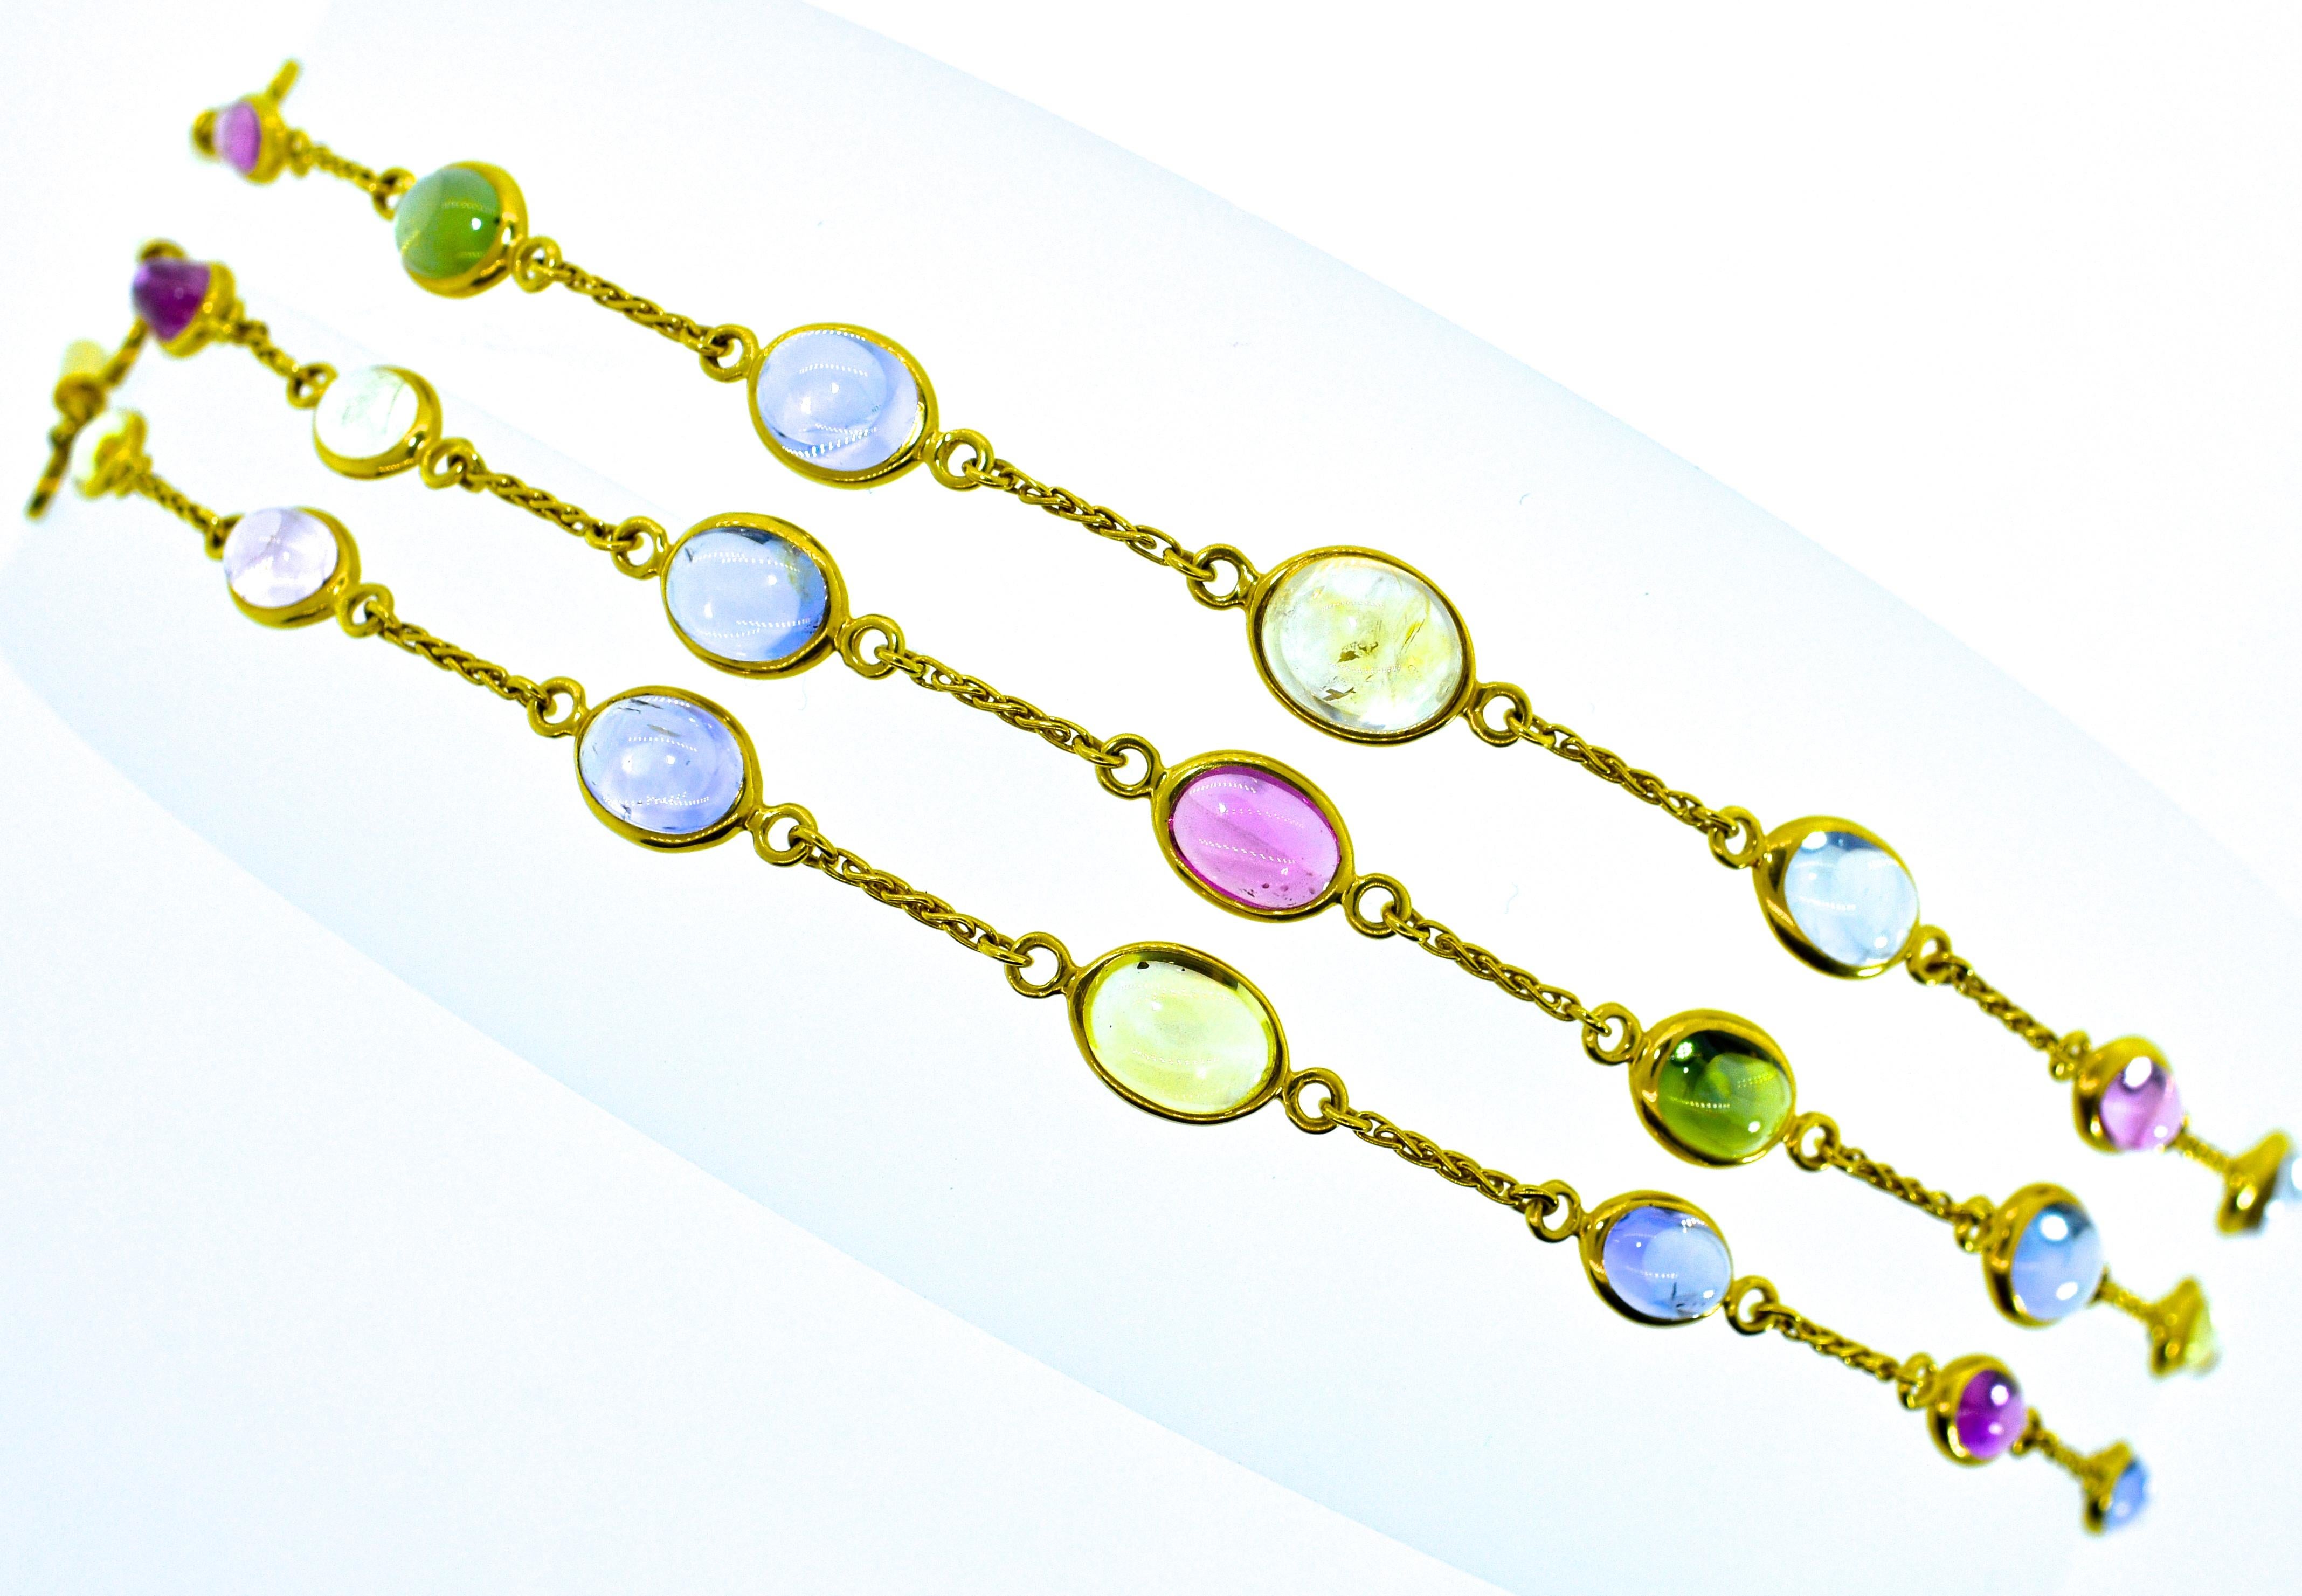 Bulgari multi color sapphire stones set in 18K.  This 18K yellow gold piece can be worn  as 3 bracelets - all just slightly more than 7 inches each and also clasped together as a necklace There are 21 natural sapphires weighing approximately 35 cts.